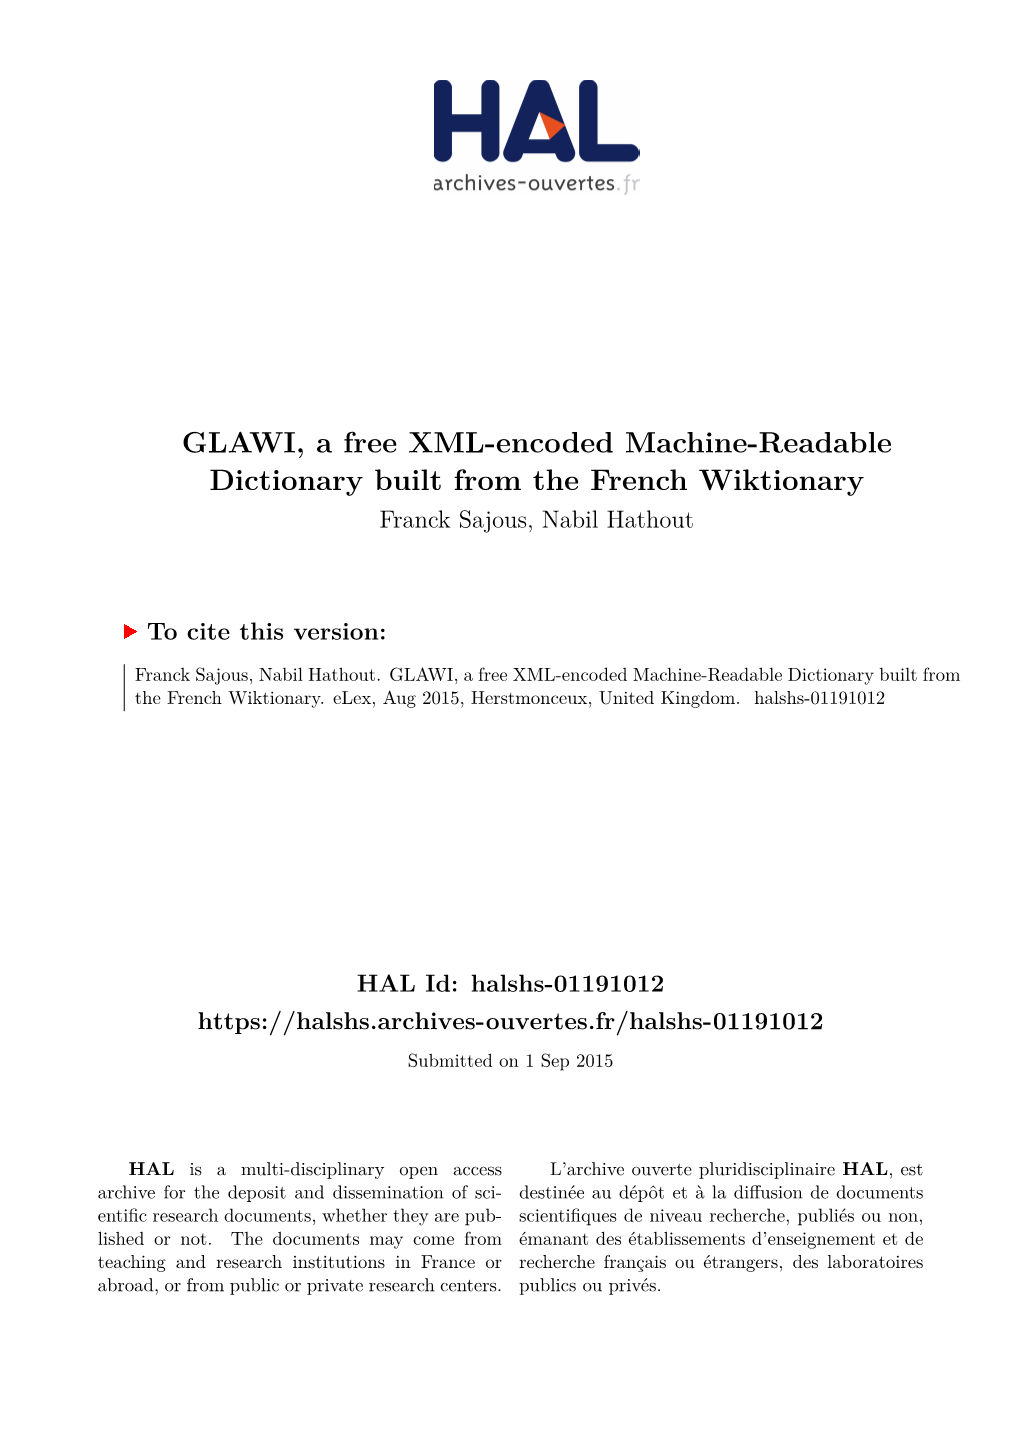 GLAWI, a Free XML-Encoded Machine-Readable Dictionary Built from the French Wiktionary Franck Sajous, Nabil Hathout